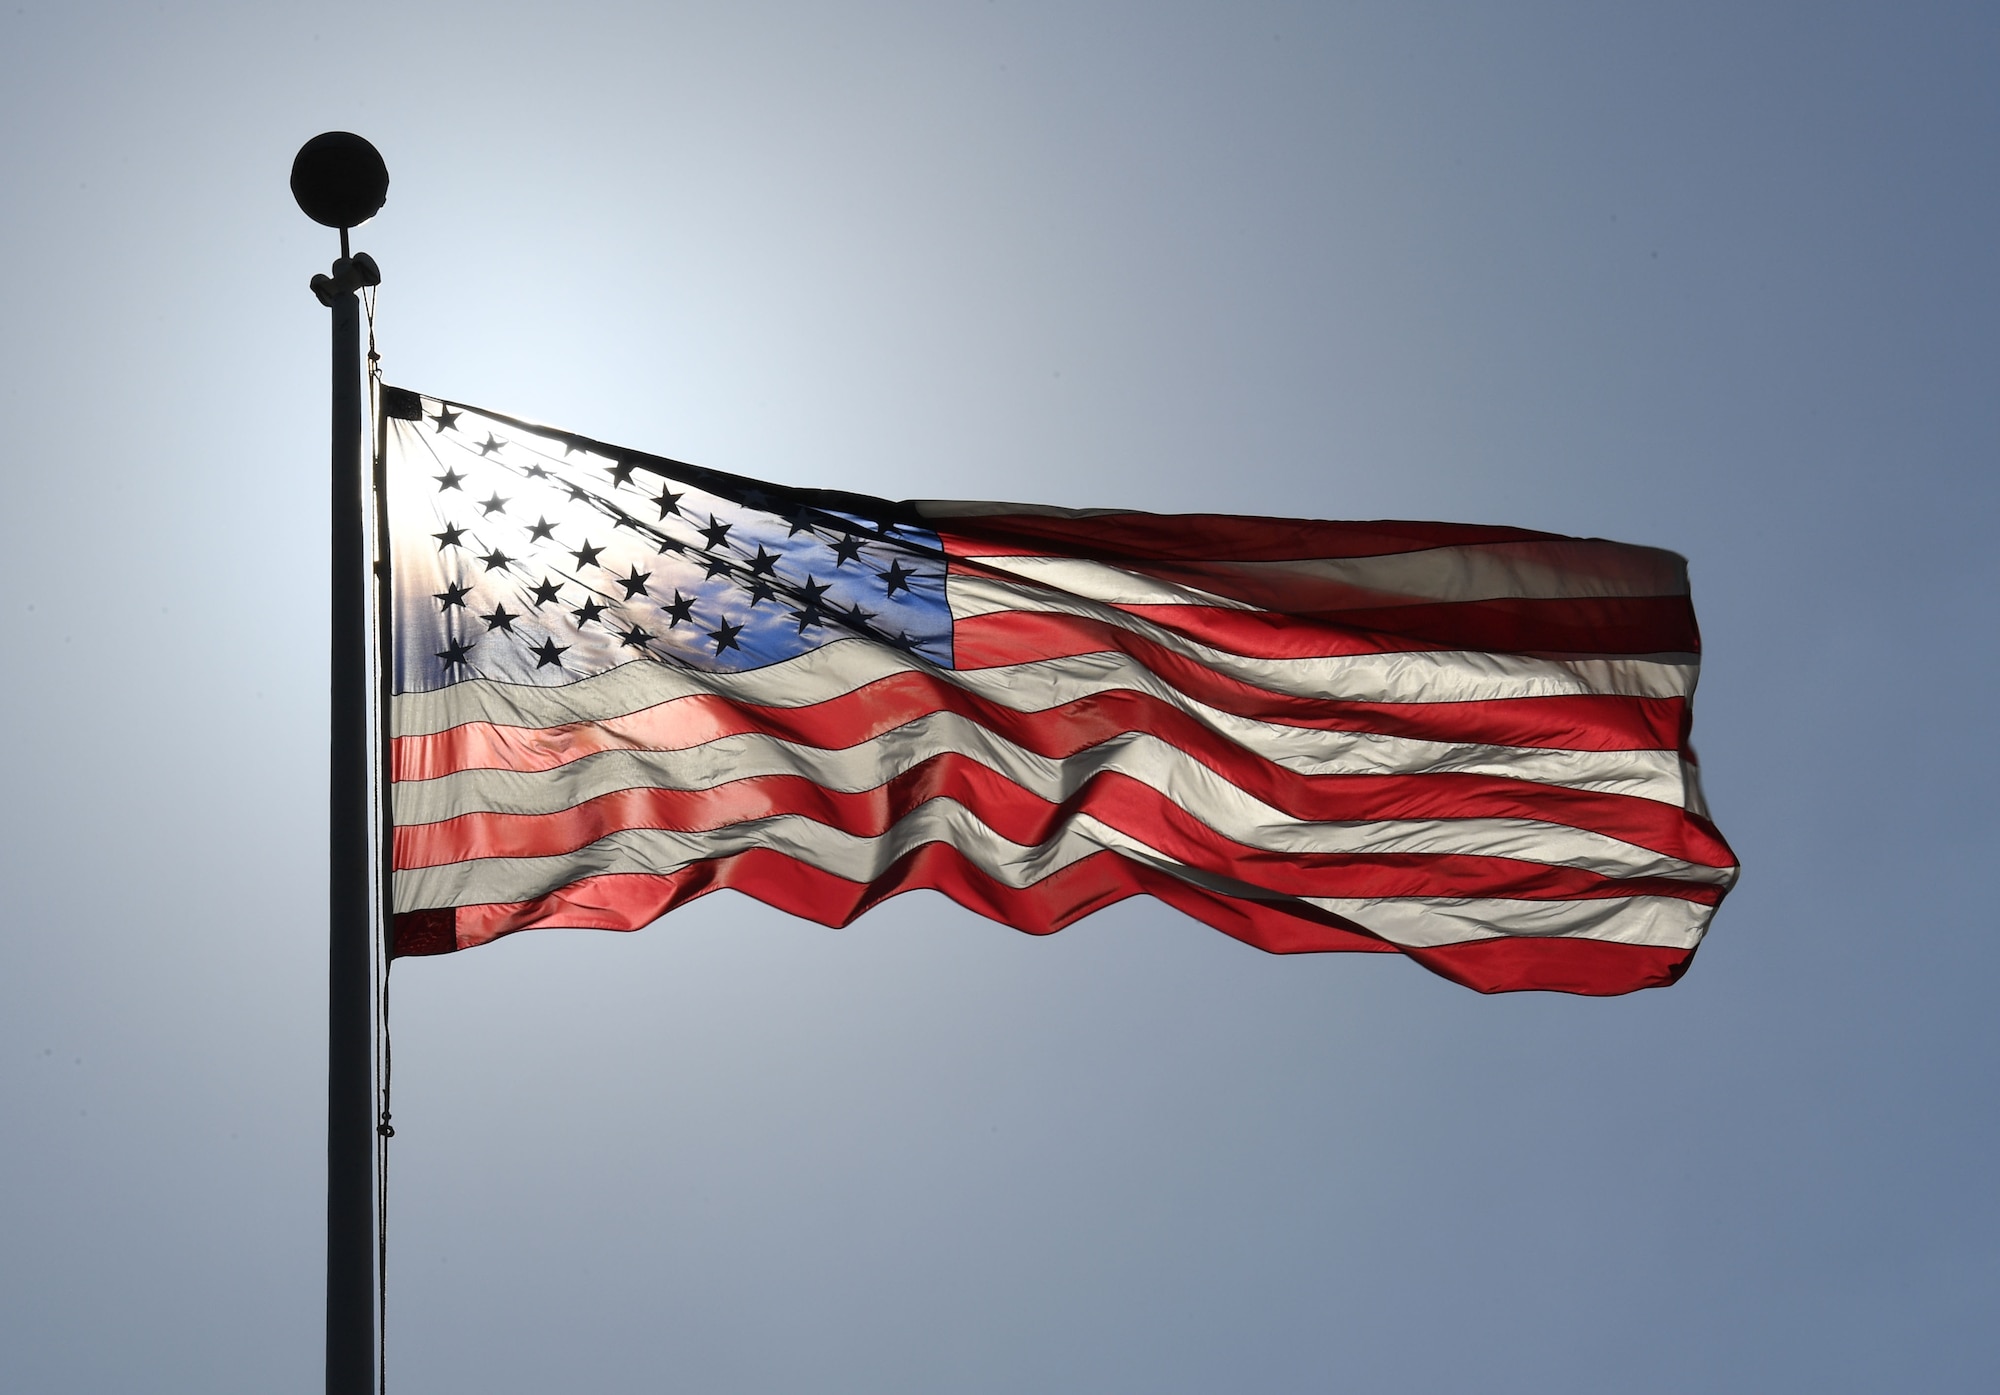 The U.S. flag is displayed during a retreat ceremony at Keesler Air Force Base, Mississippi, May 20, 2022. June 14 is Flag Day, a celebration of the history of the American flag and a time to remember proper etiquette for its display. Flag Day recognizes the adoption of the Stars and Stripes as the official flag of the United States on June 14, 1777, by the Continental Congress meeting in Philadelphia. This is the 5th year that the Air Force Sergeants Association Chapter 652 has volunteered to place 1,000 flags along Larcher Blvd. and Meadows Drive. (U.S. Air Force photo by Kemberly Groue)